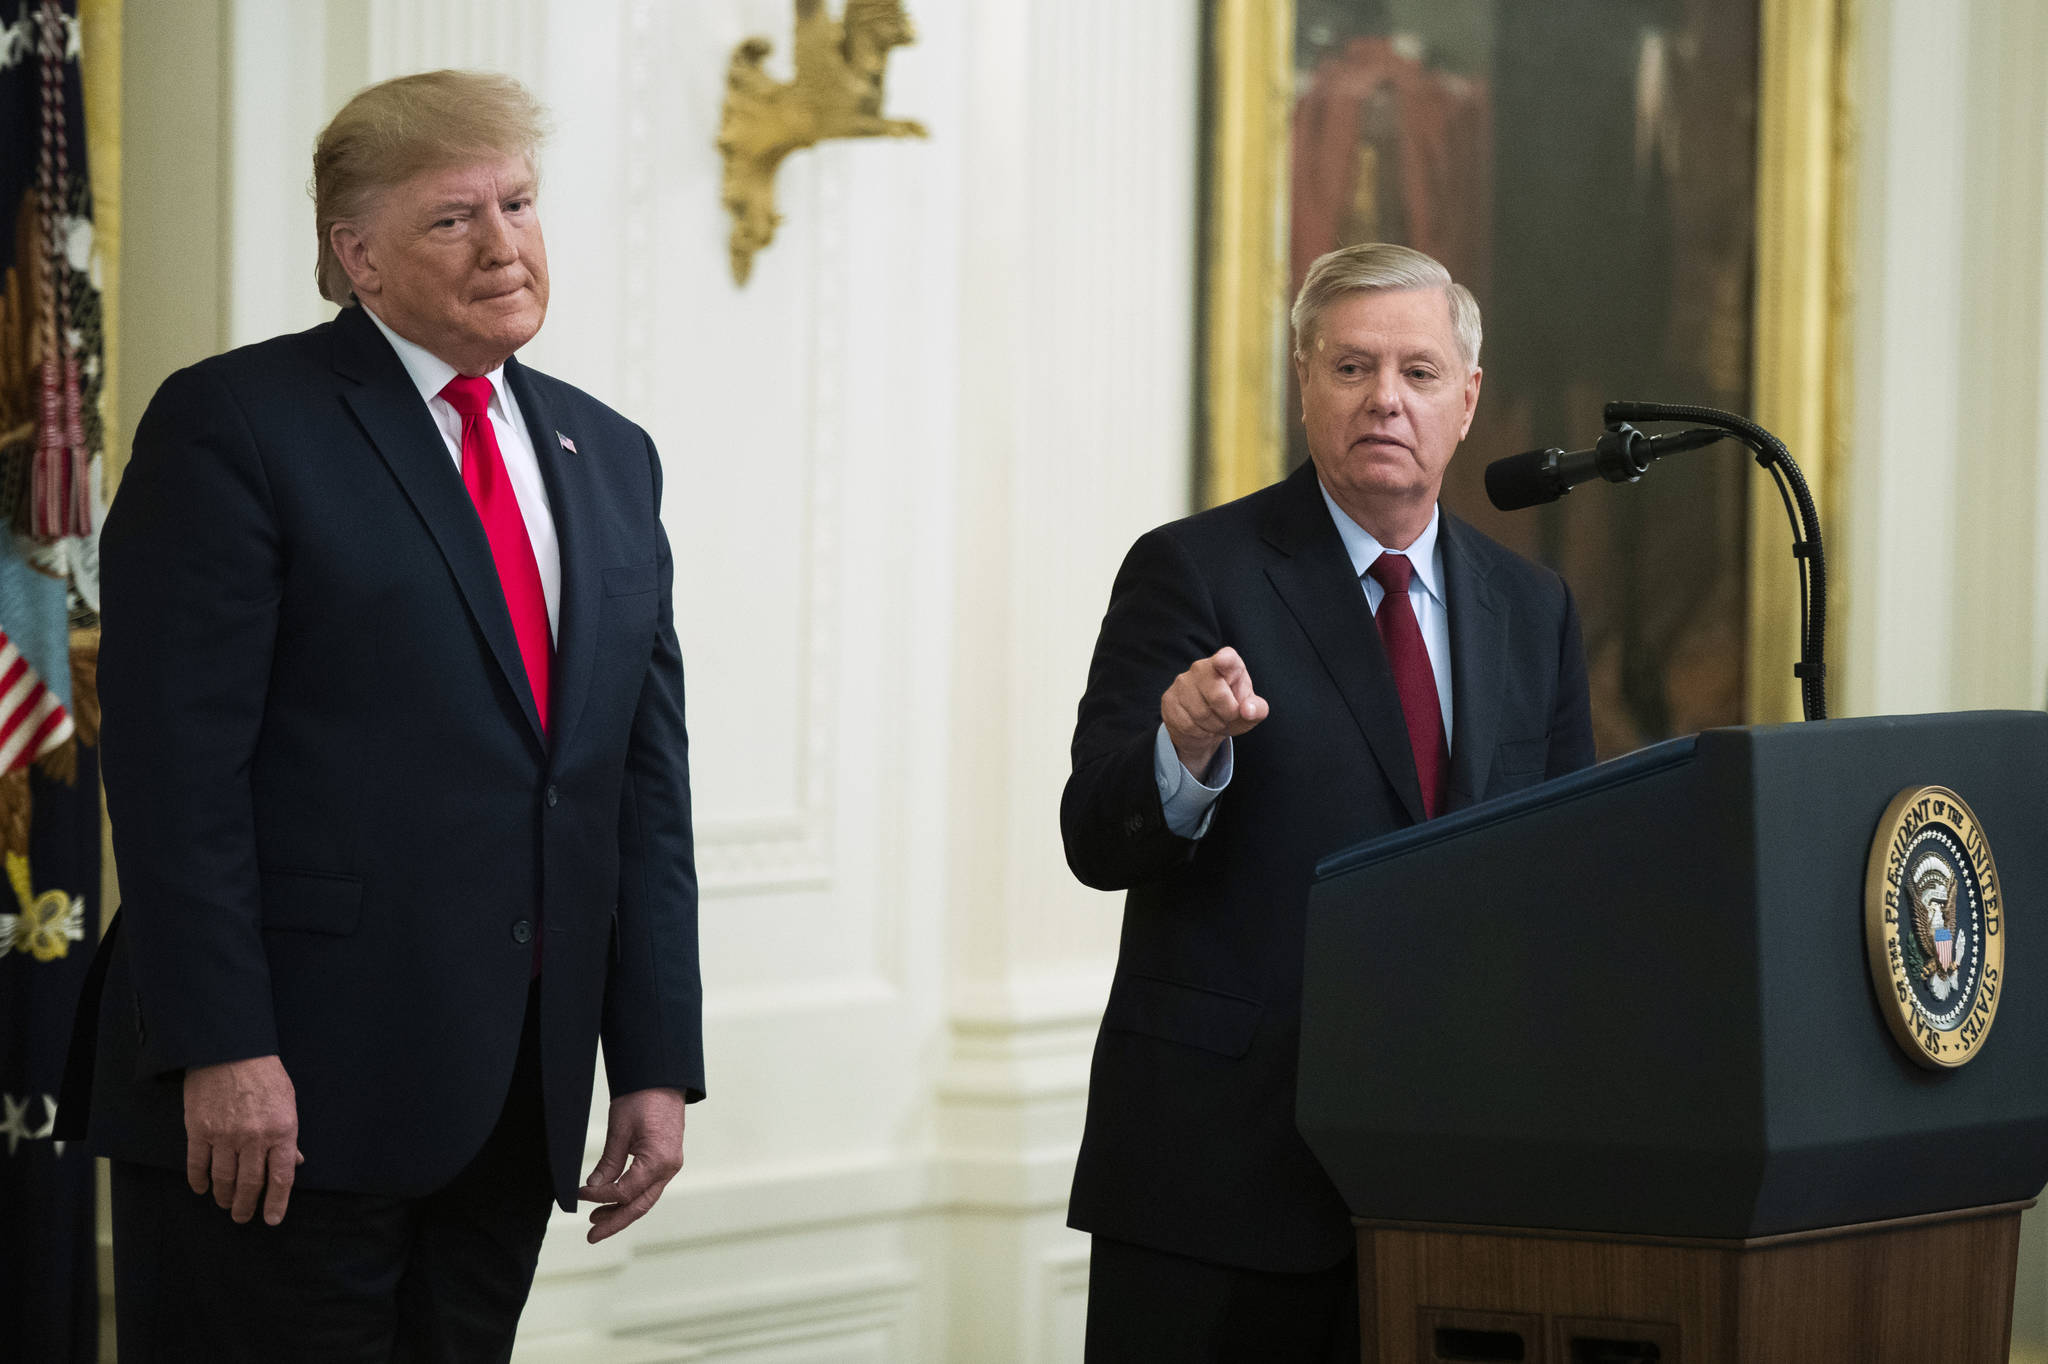 President Donald Trump listens to Sen. Lindsey Graham, R-S.C., speak during a ceremony in the East Room of the White House where Trump spoke about his judicial appointments, Wednesday, Nov. 6, 2019, in Washington. (AP Photo | Manuel Balce Ceneta)